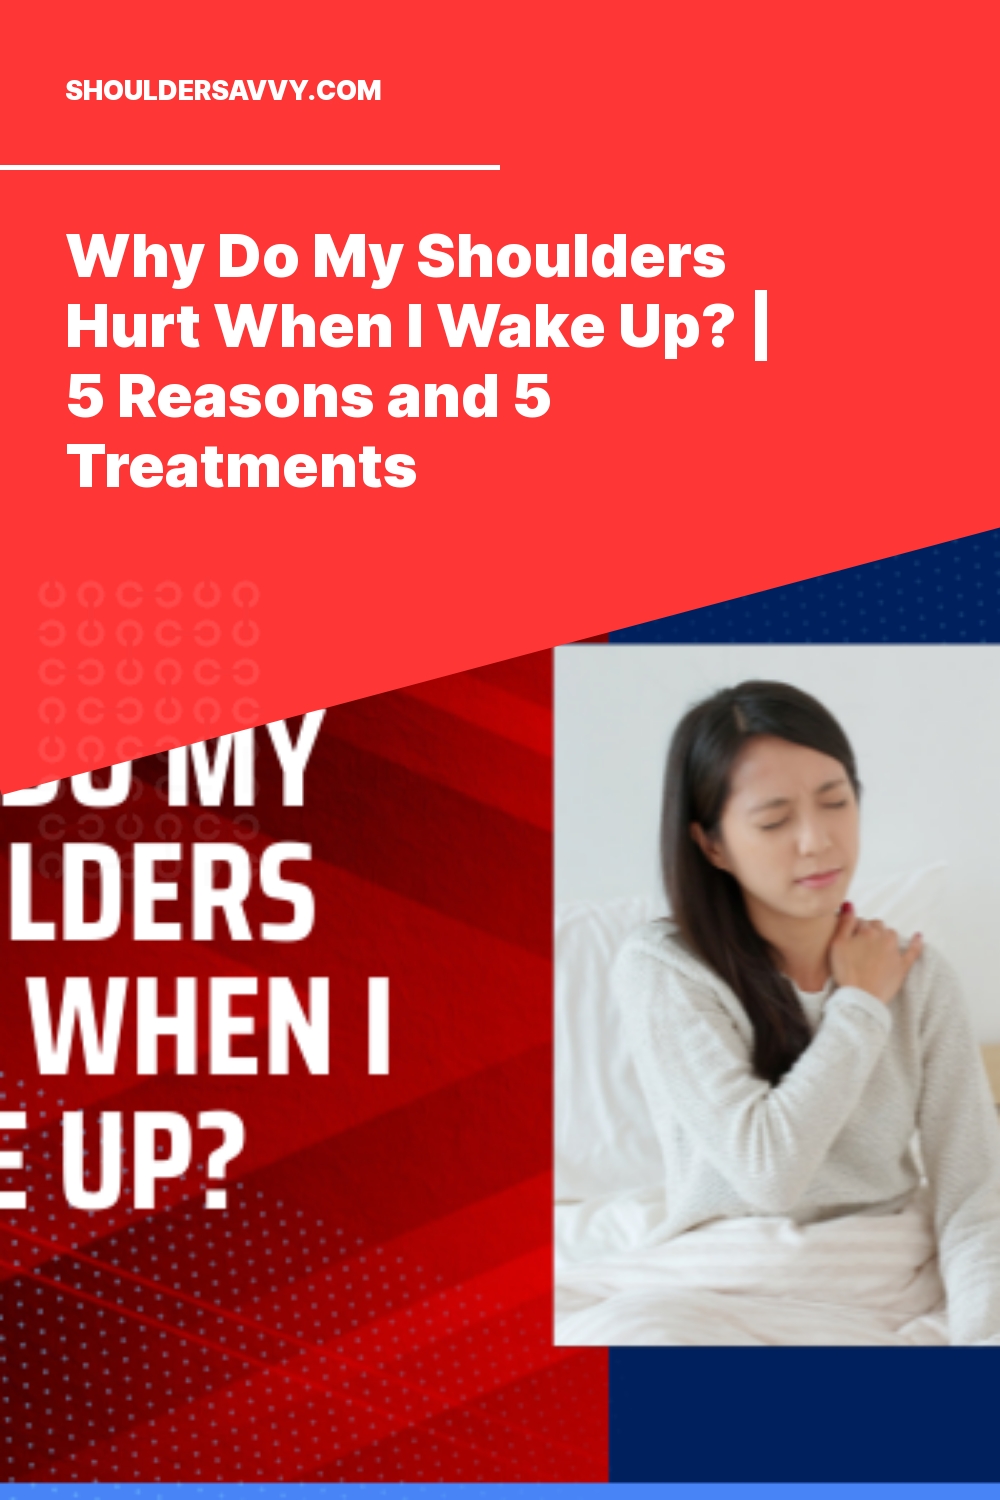 Why Do My Shoulders Hurt When I Wake Up? | 5 Reasons and 5 Treatments